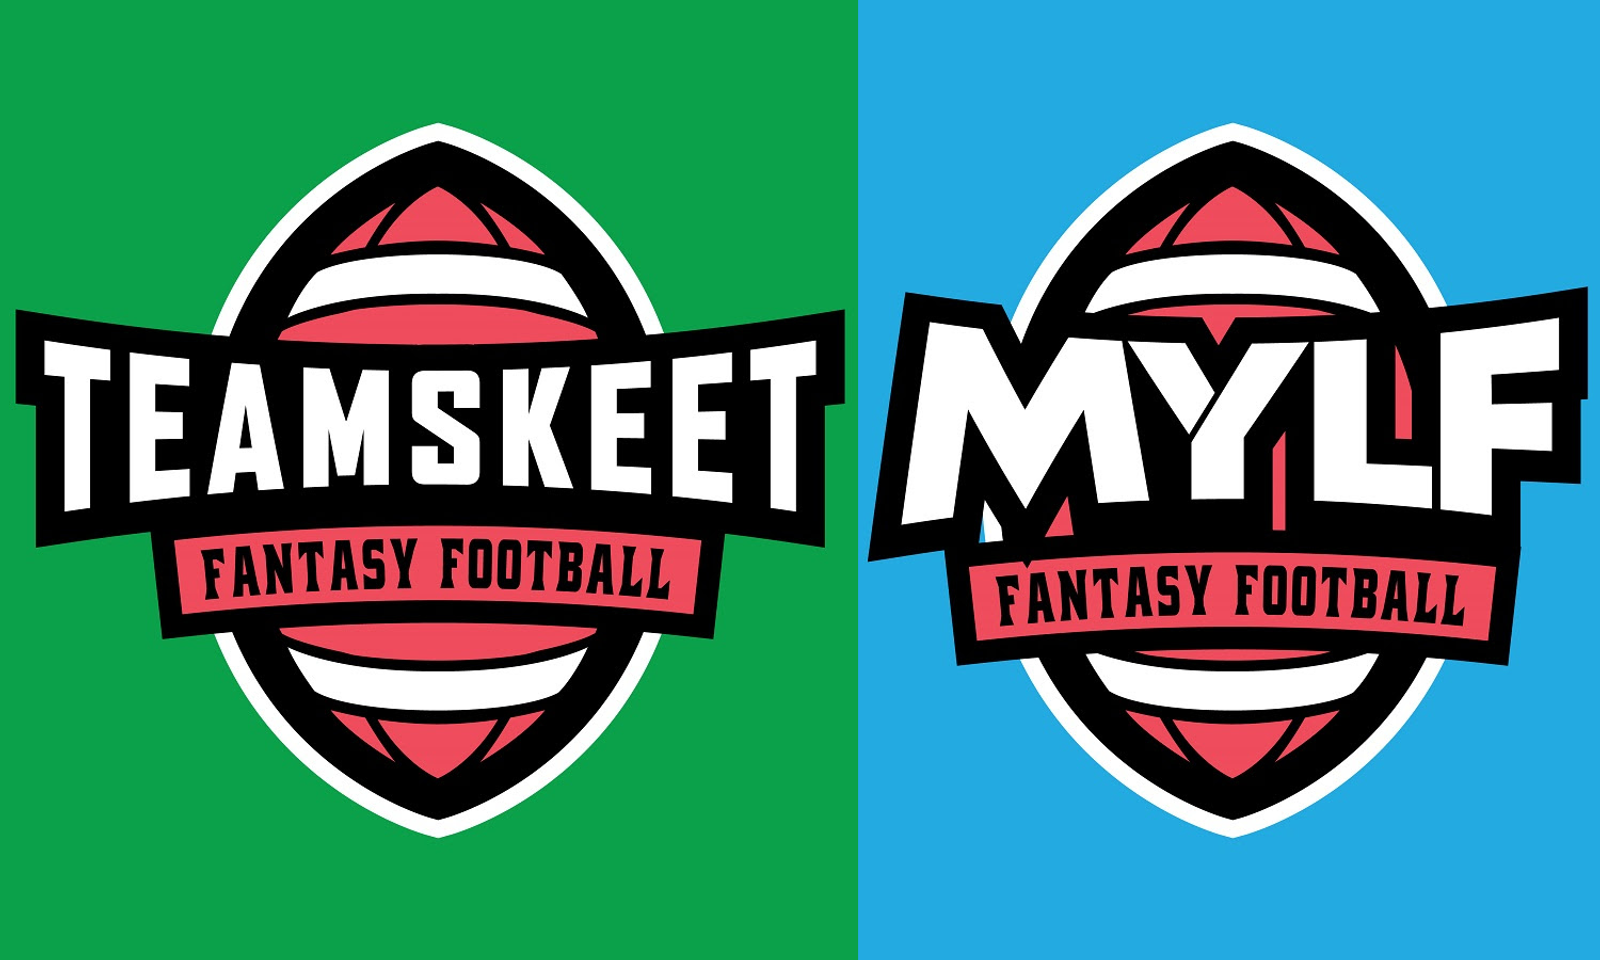 Team Skeet, MYLF to Roll Out 8 Fantasy Football Themed Scenes